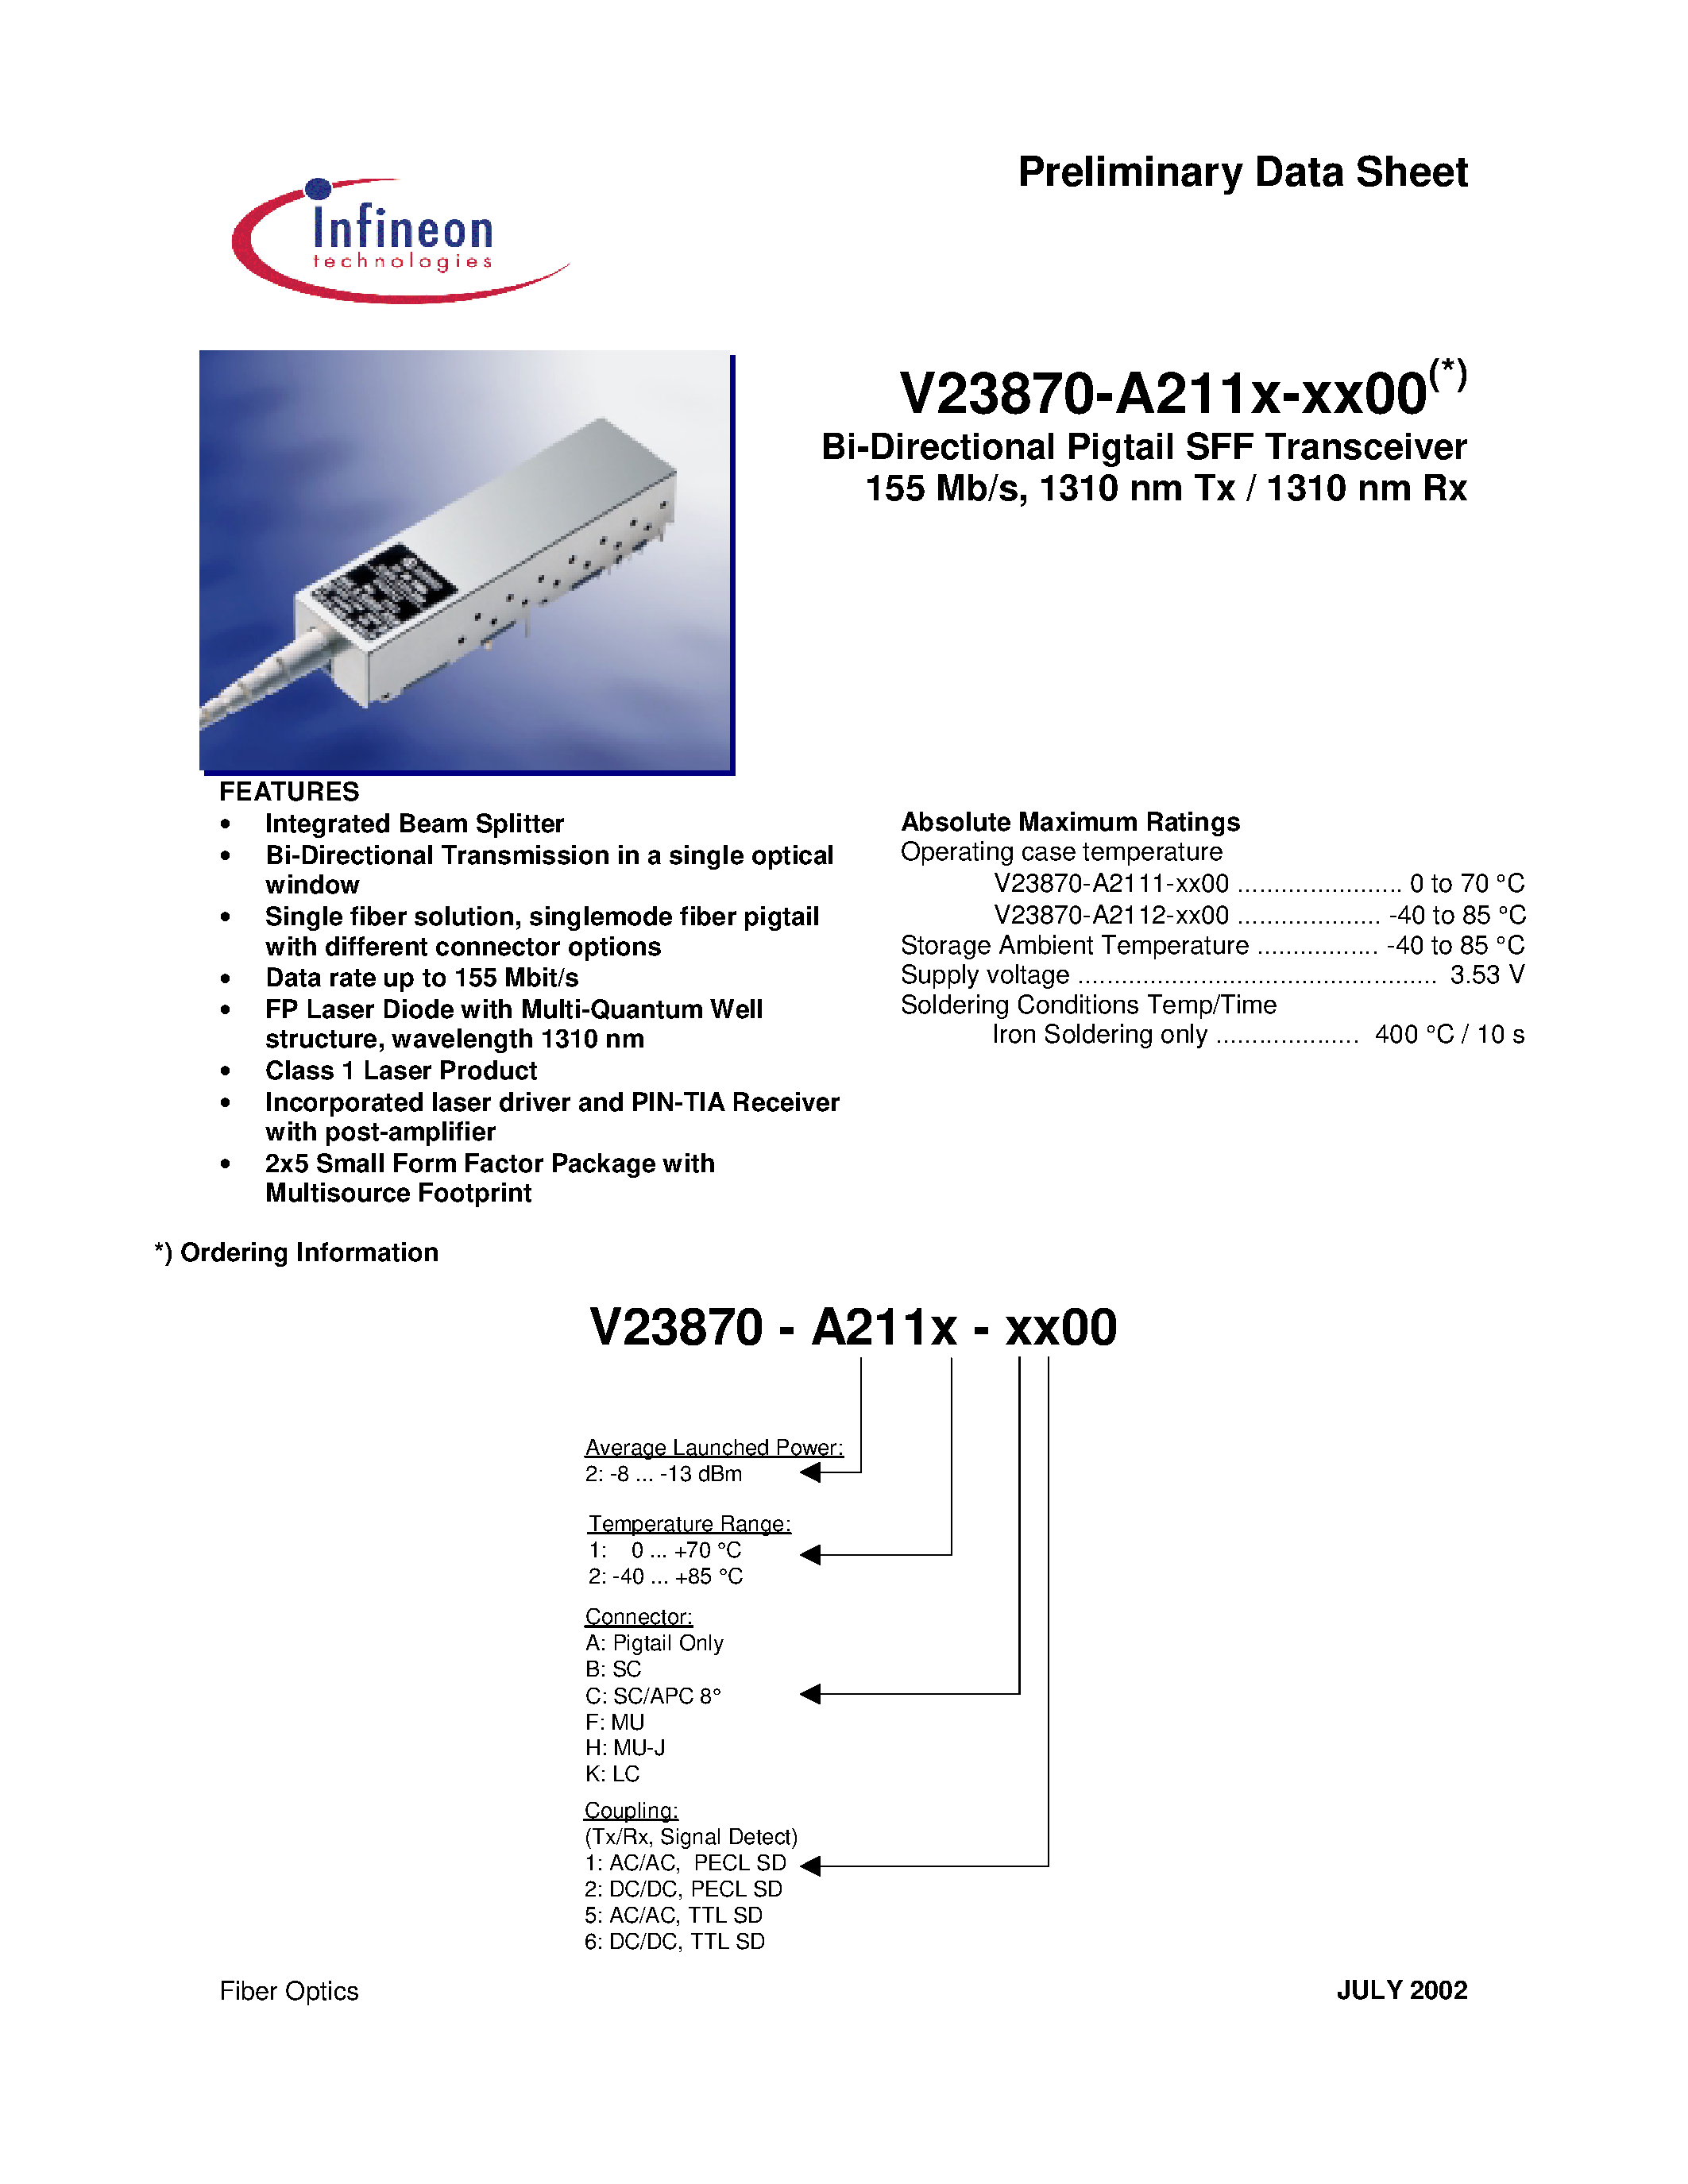 Datasheet V23870-A2112-C500 - Bi-Directional Pigtail SFF Transceiver 155 Mb/s/ 1310 nm Tx / 1310 nm Rx page 1